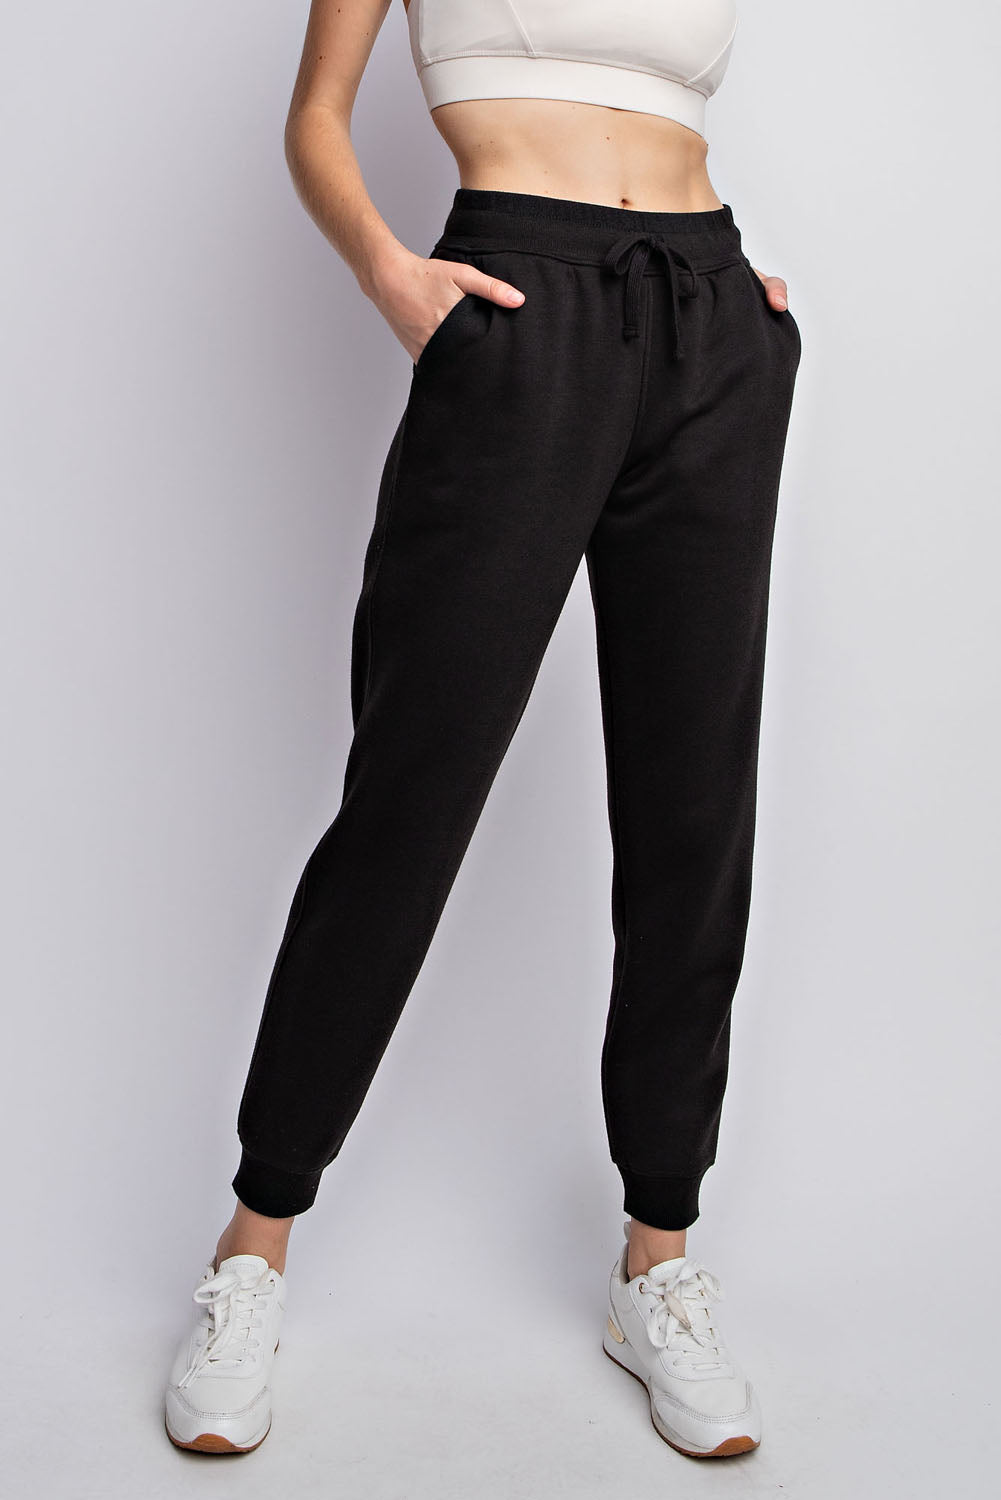 French Terry Sweatpants – HMNstyle